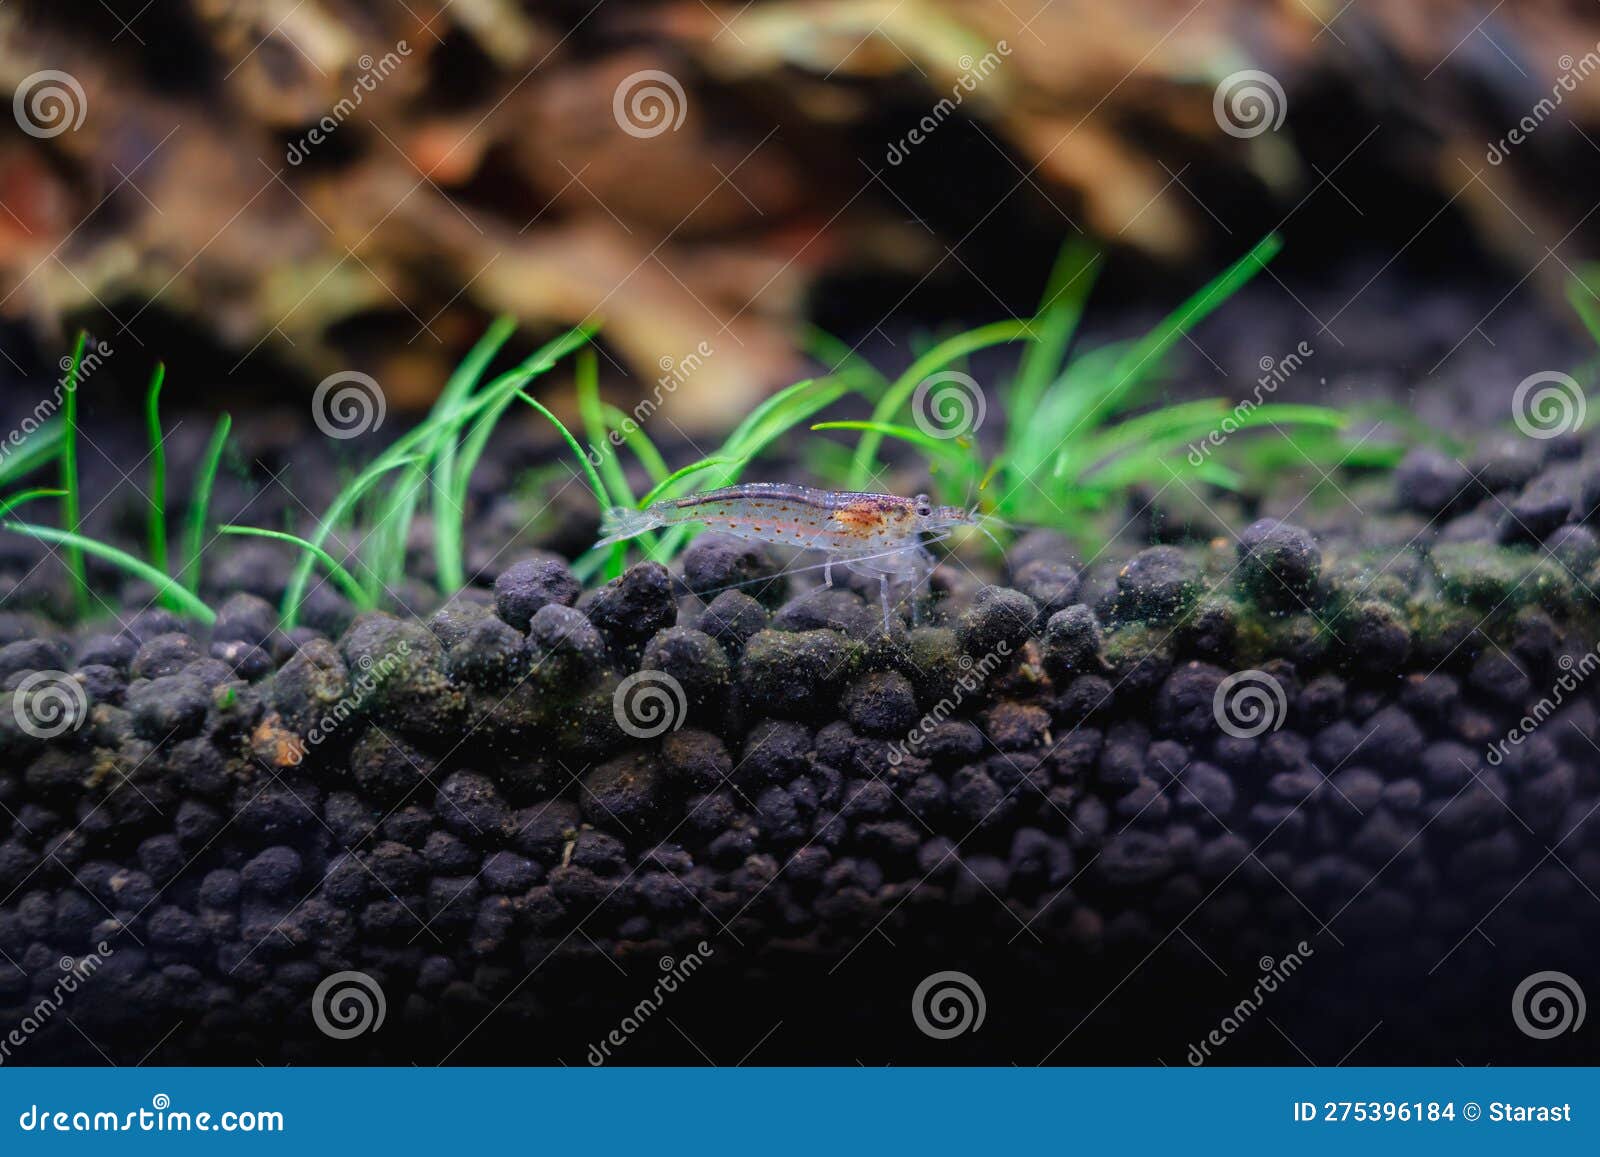 freshwater amano shrimp on the soil in a plant aquascape